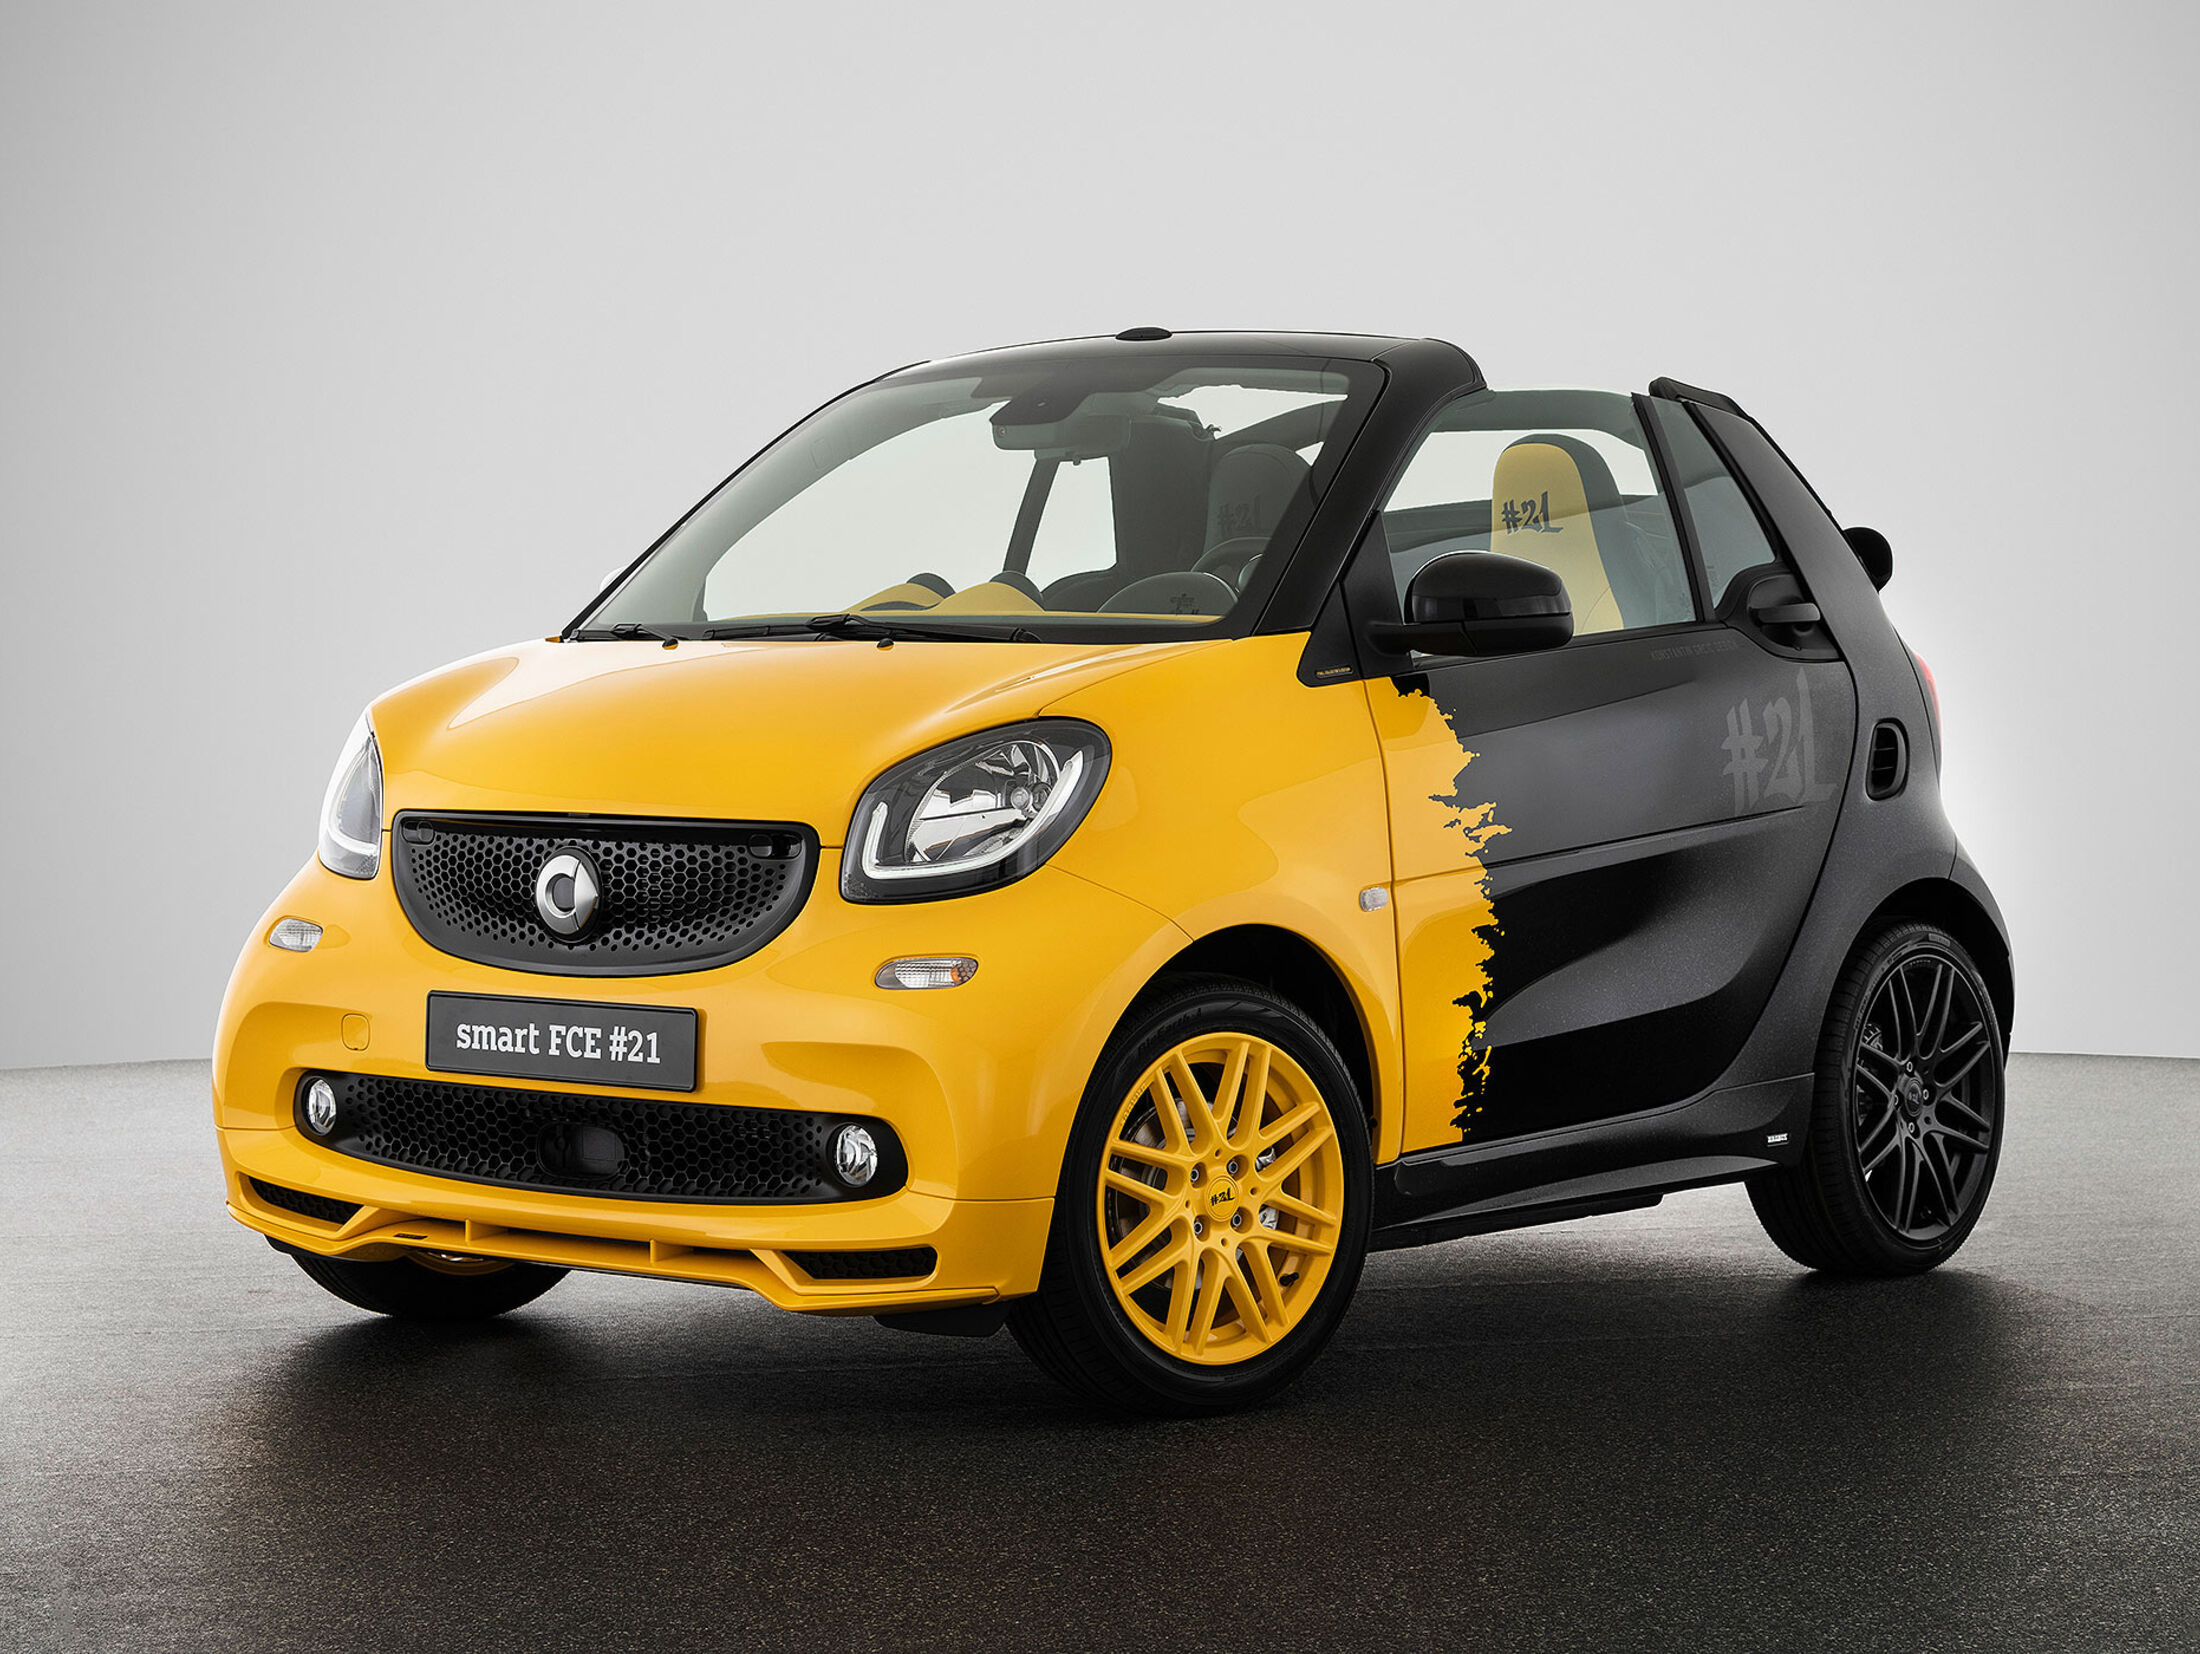 Smart Fortwo Final Collector's Edition: Abschiedsmodell